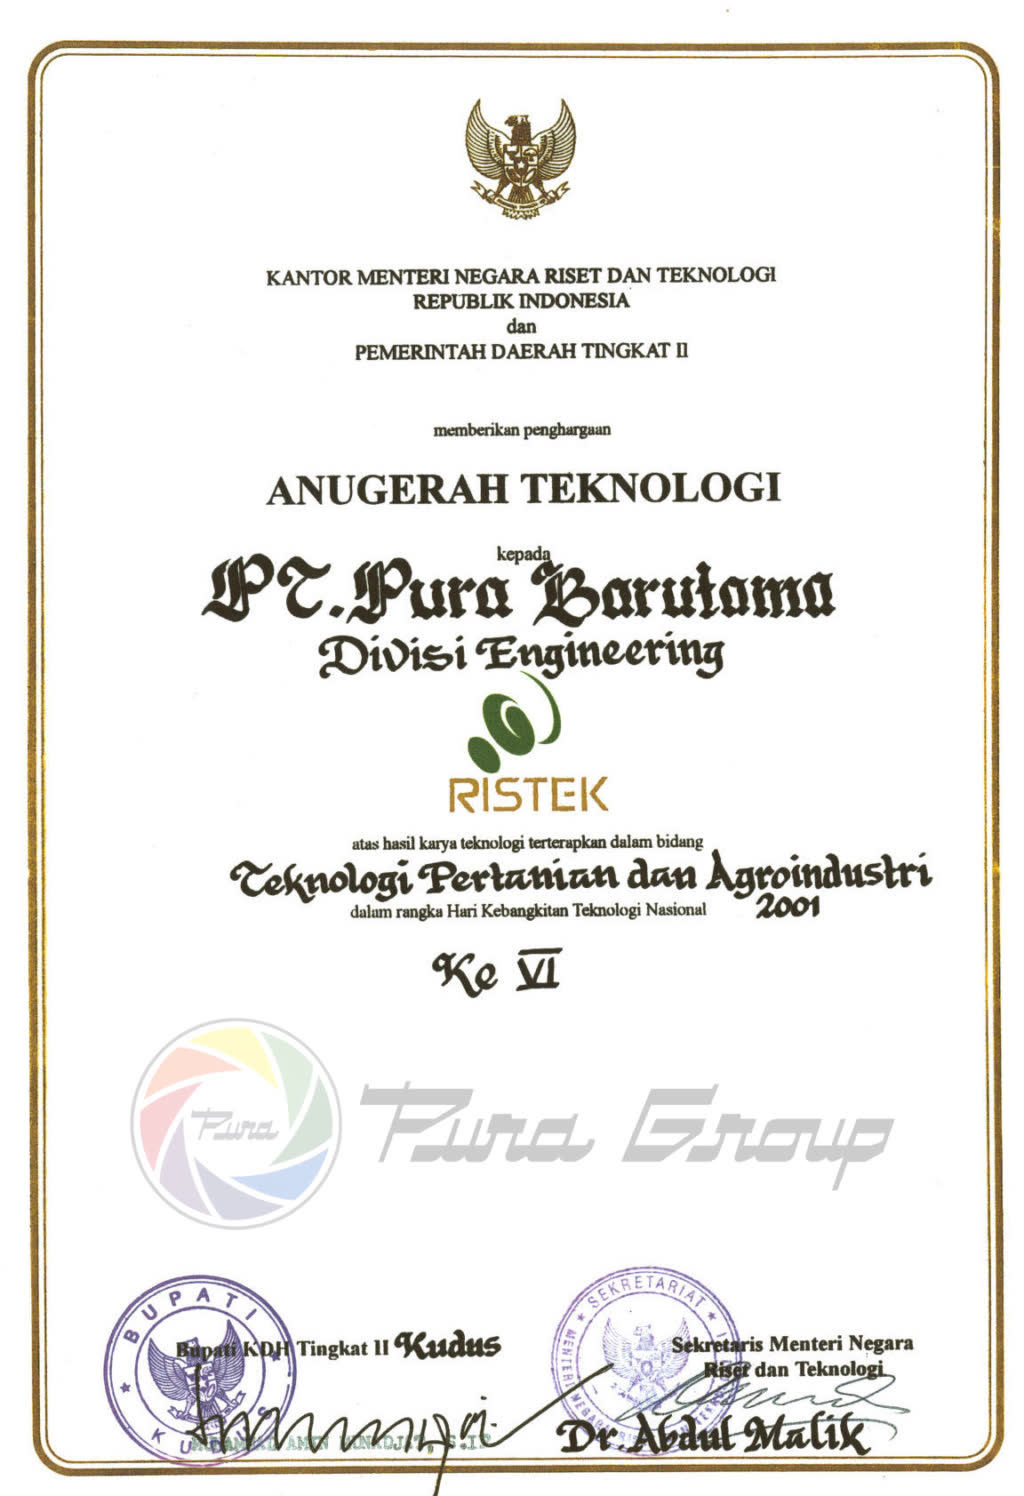 RESEARCH AND TECHNOLOGY MINISTRY AWARD 2001